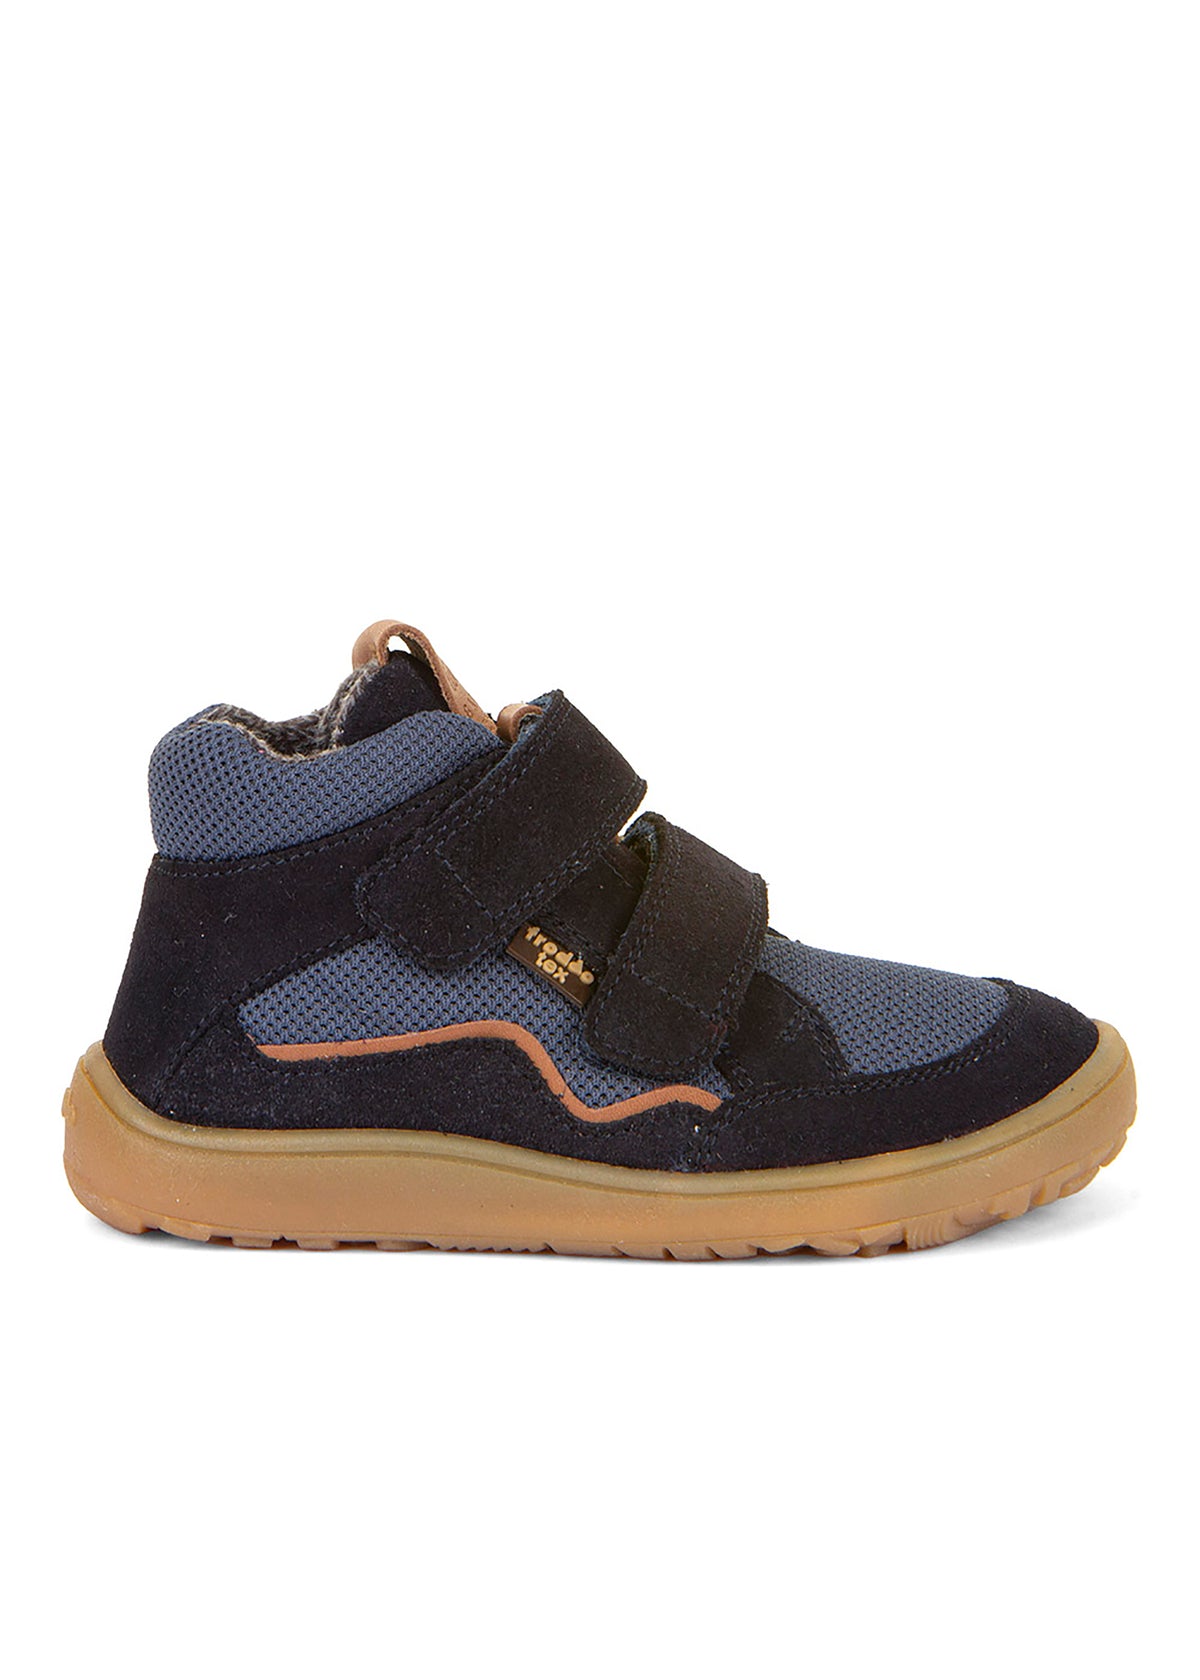 Barefoot sneakers with handles - mid-season shoes, Spring-TEX, dark blue